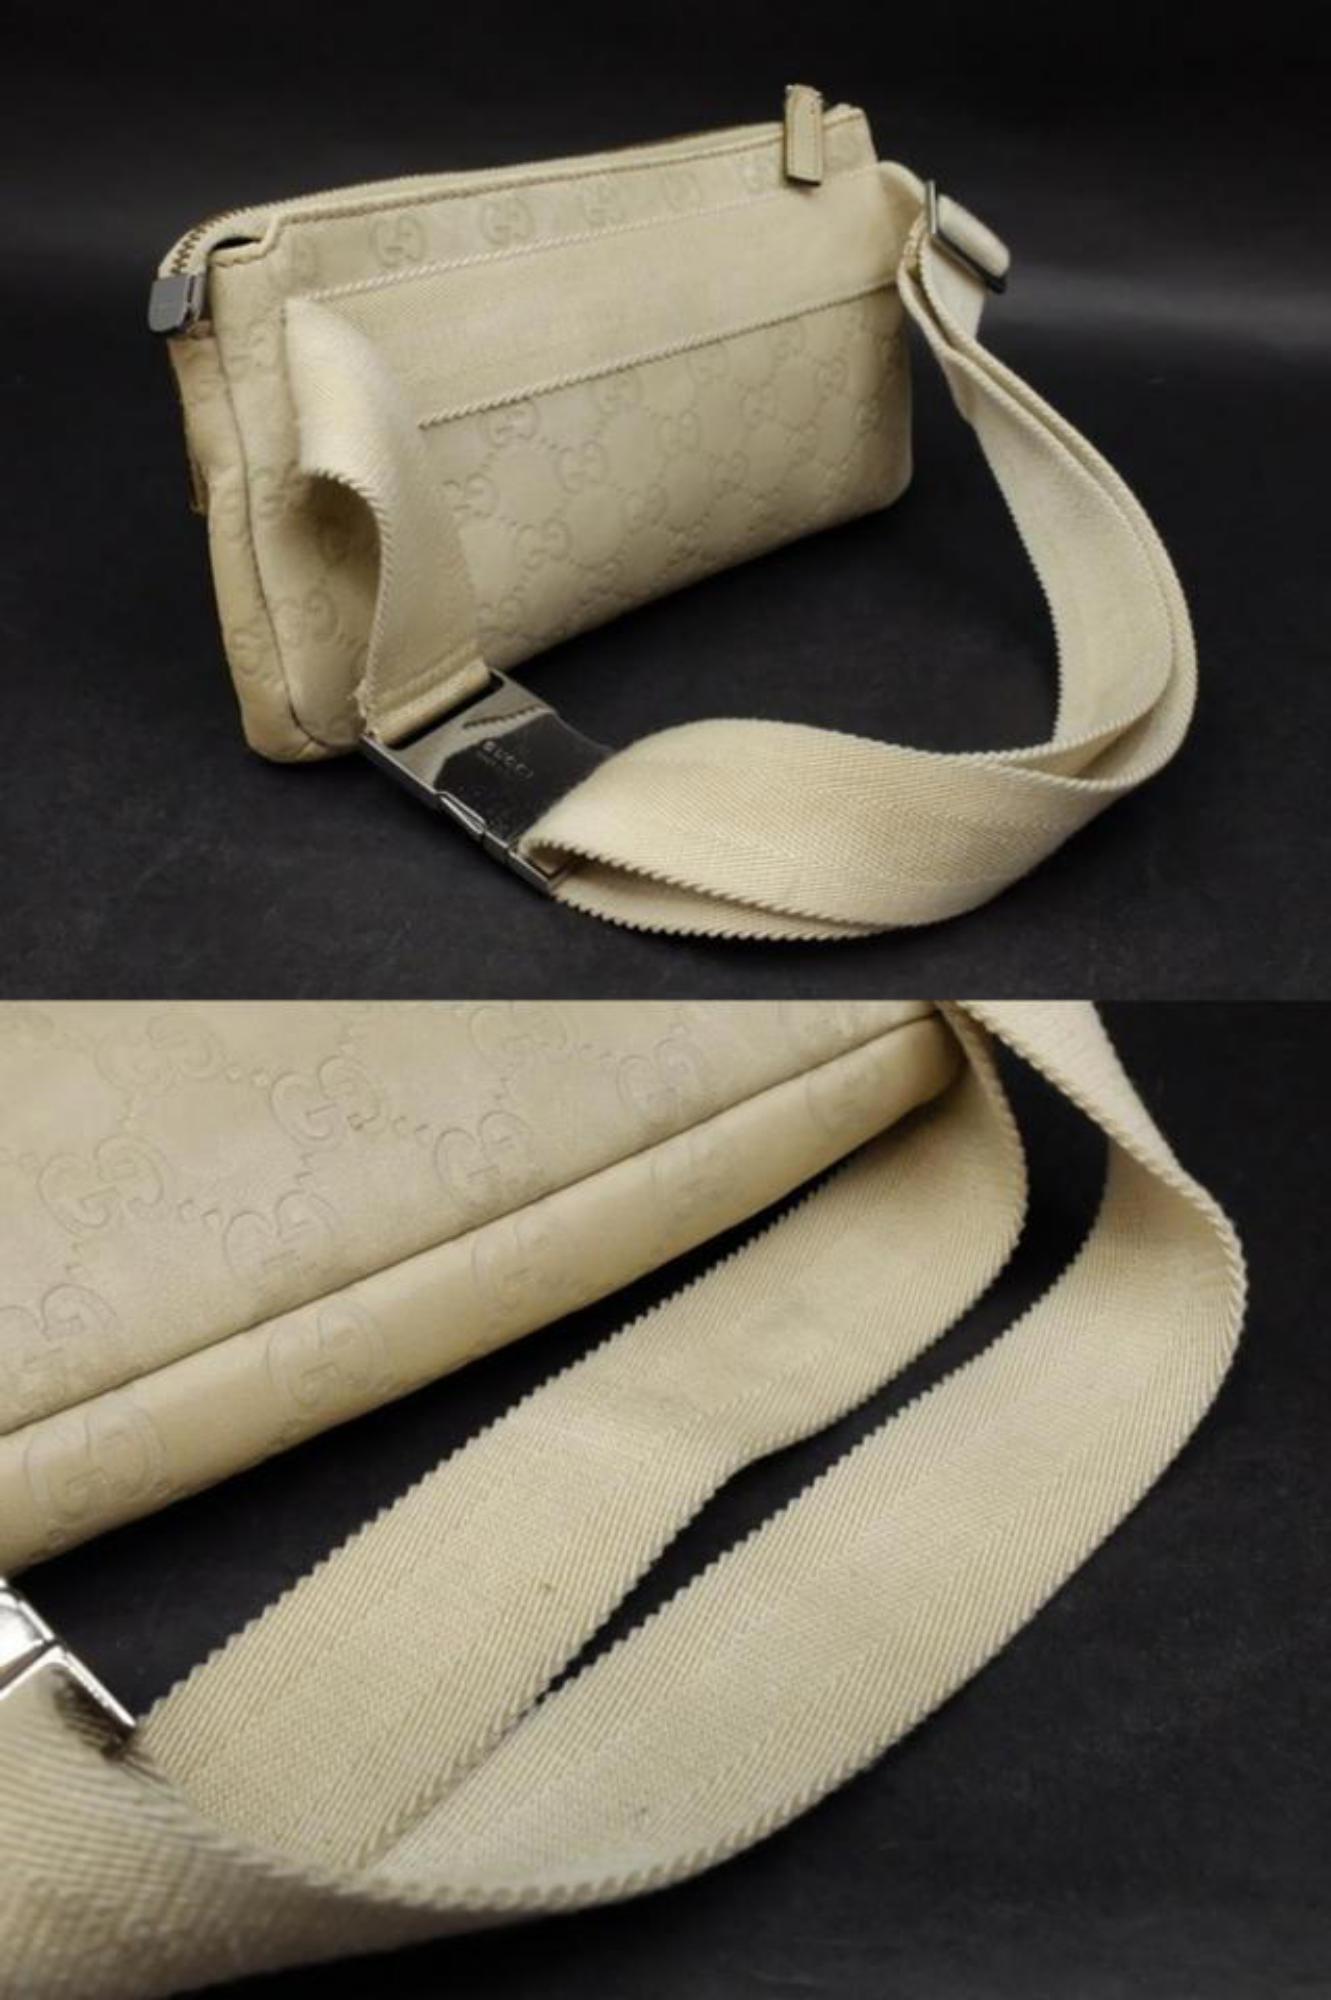 Gucci Guccissima Bum Fanny Pack Waist Pouch 232819 Beige Leather Cross Body Bag 8